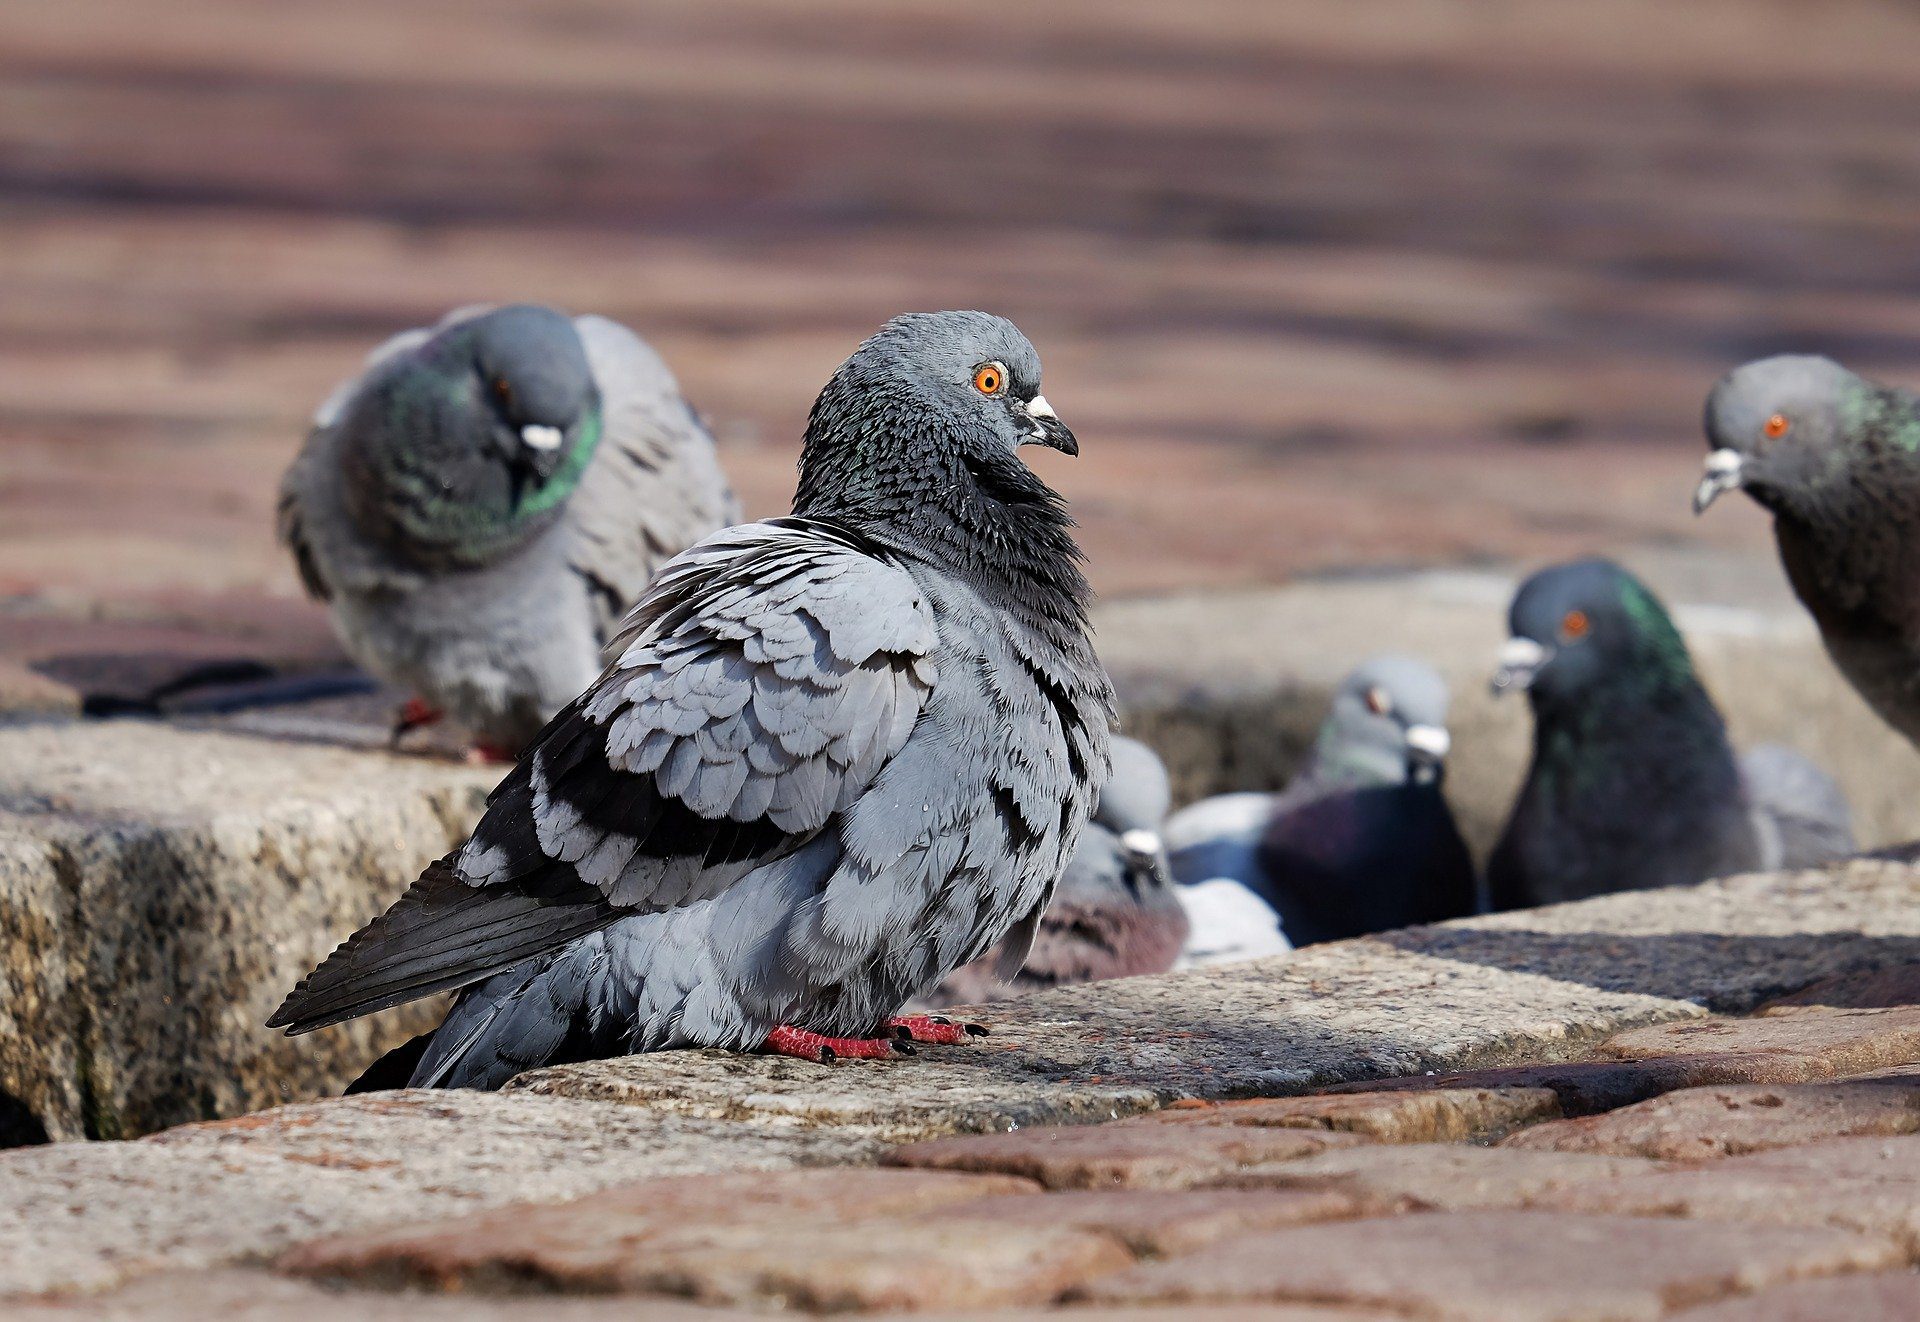 Group of pigeons on the sidewalk.